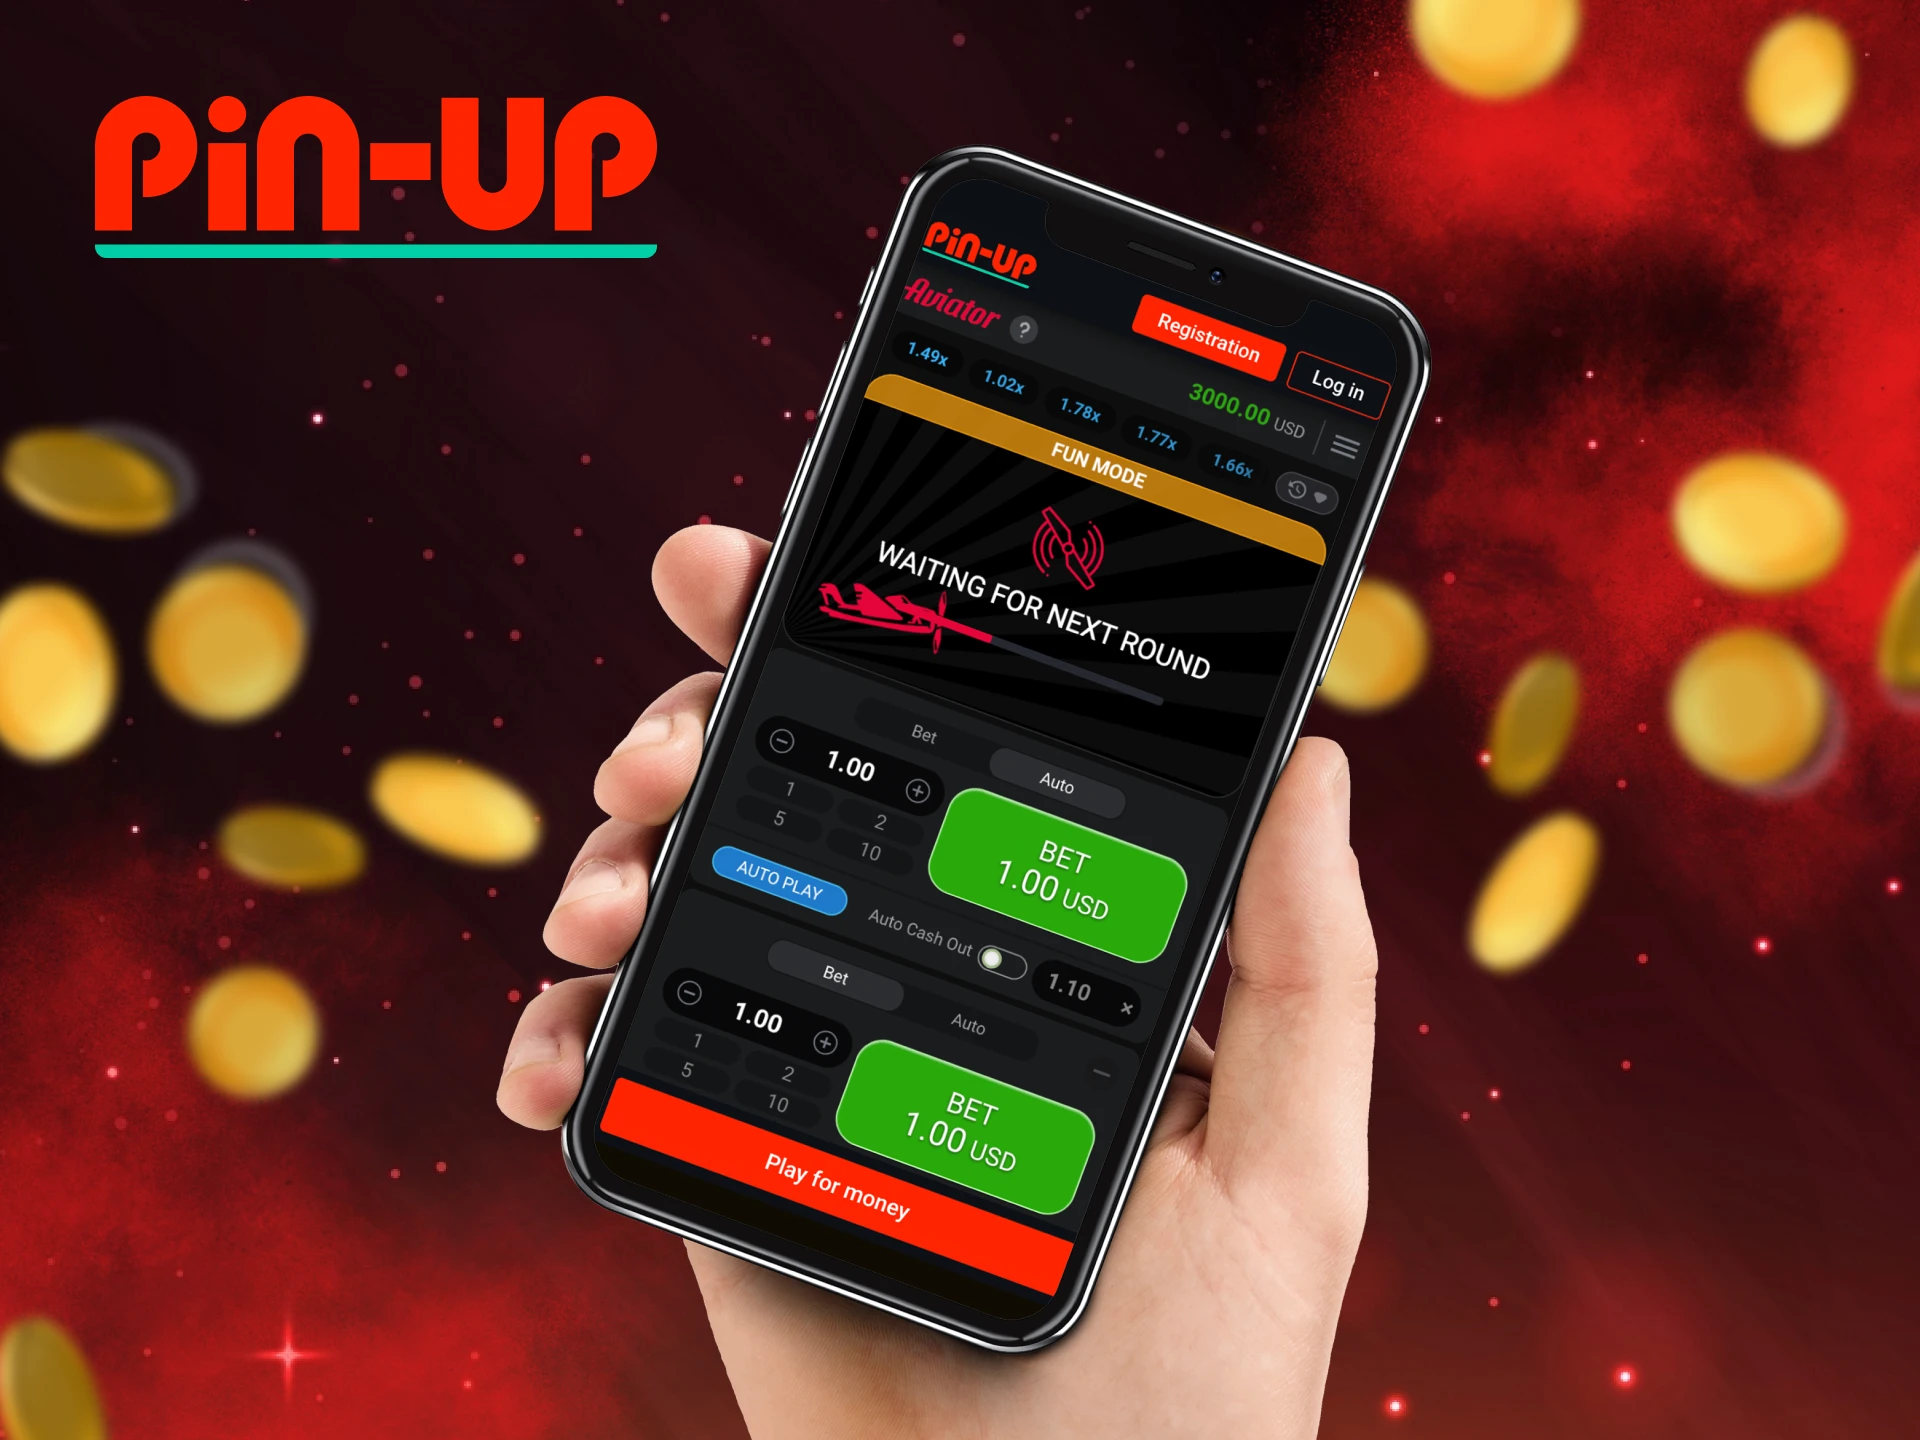 What welcome bonus will users receive in the Pin Up casino mobile app.